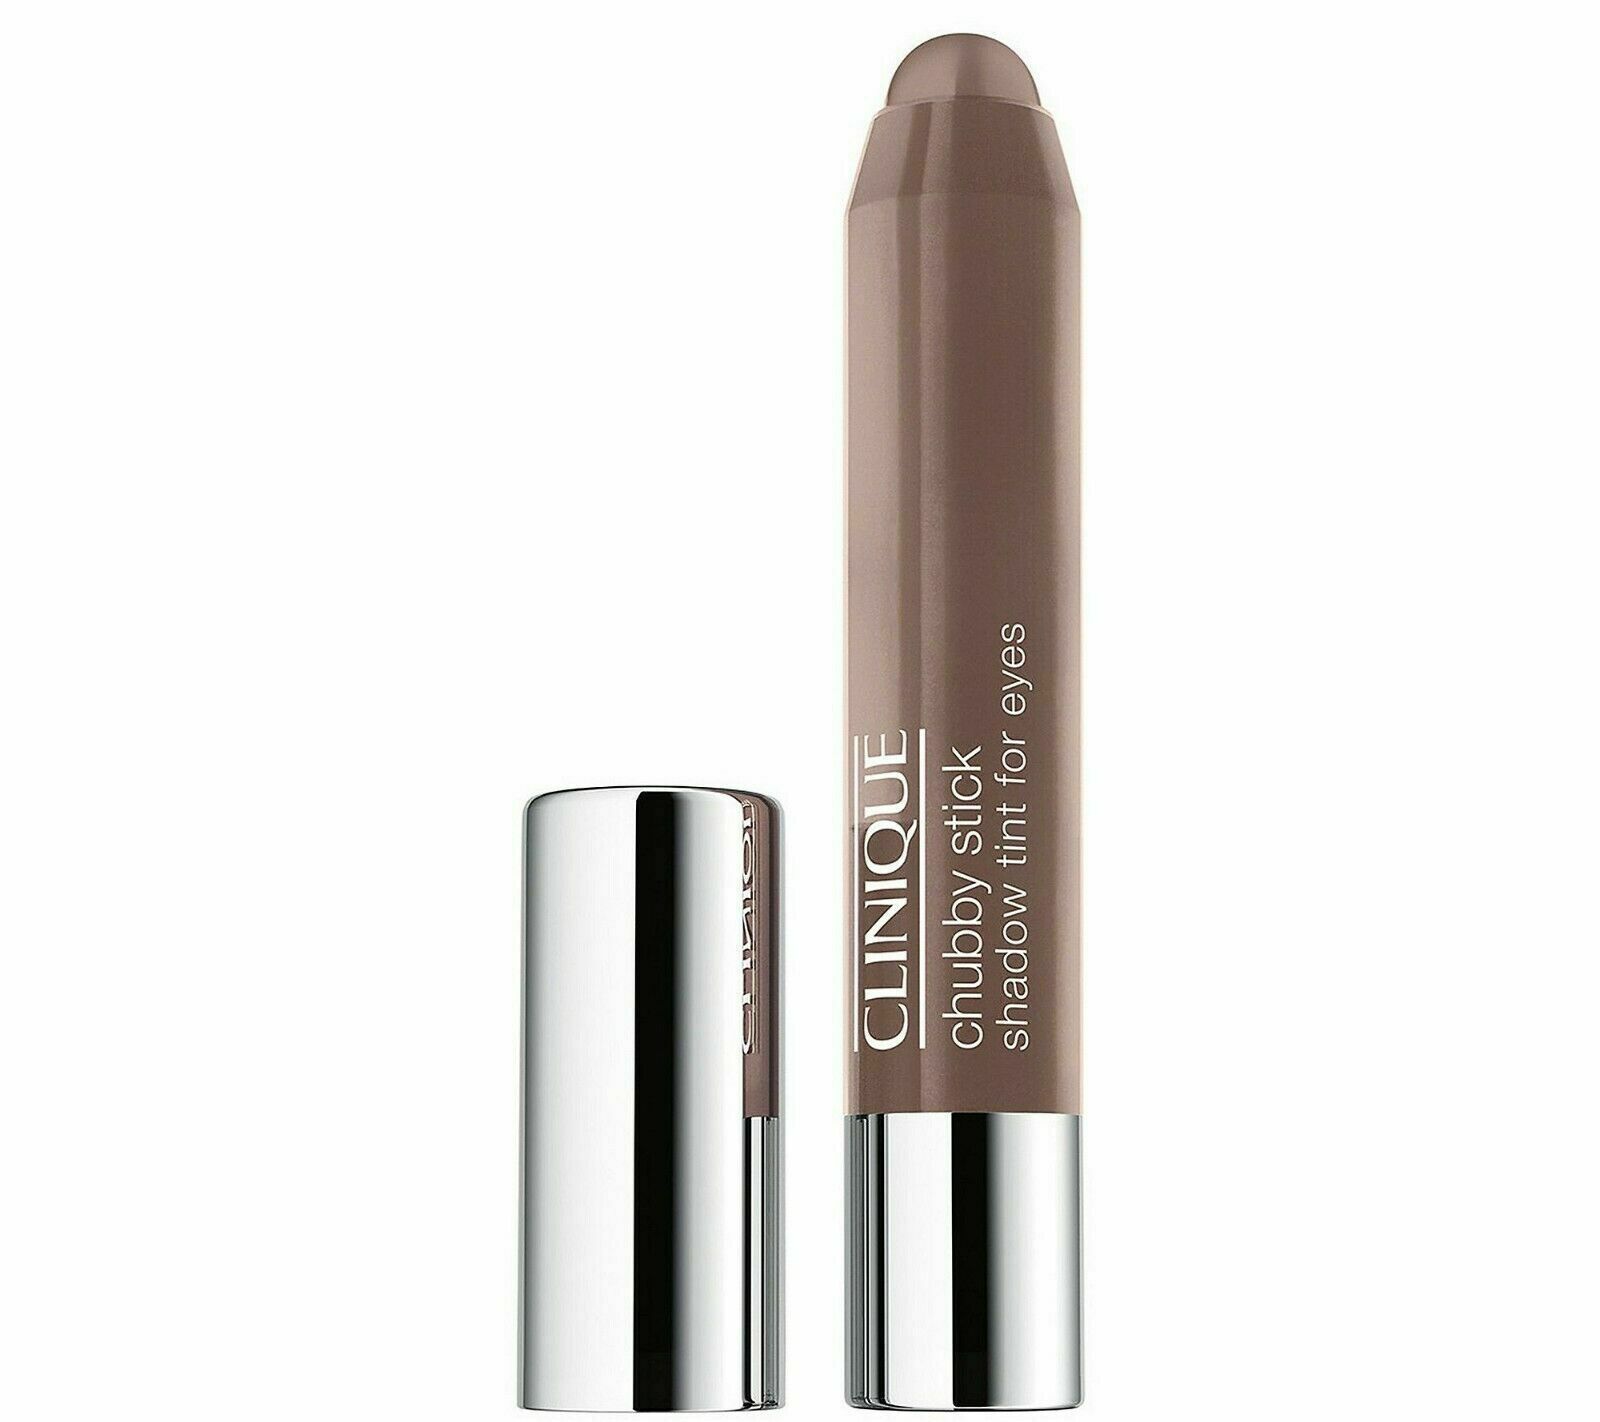 Clinique Chubby Stick Shadow Tint For Eyes in Lots O' Latte - NIB